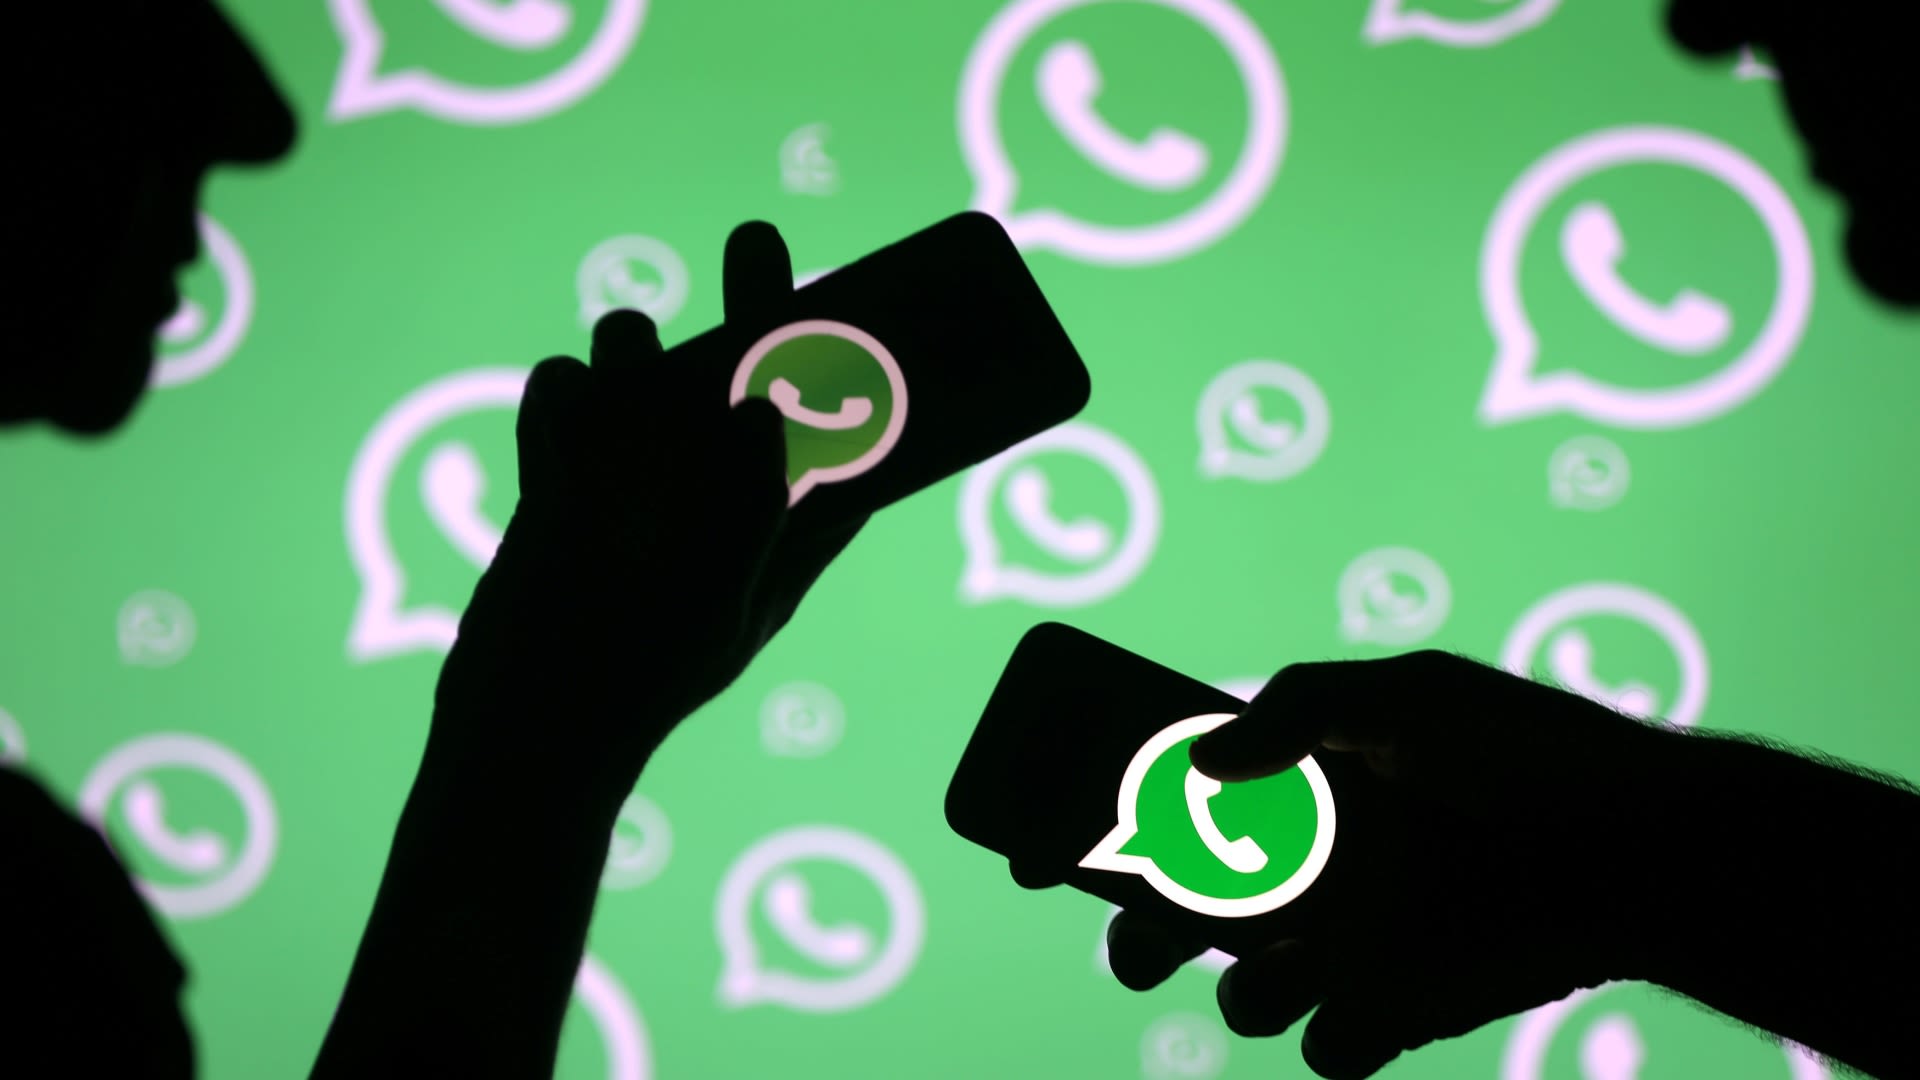 WhatsApp users receive new feature that makes group event planning much easier